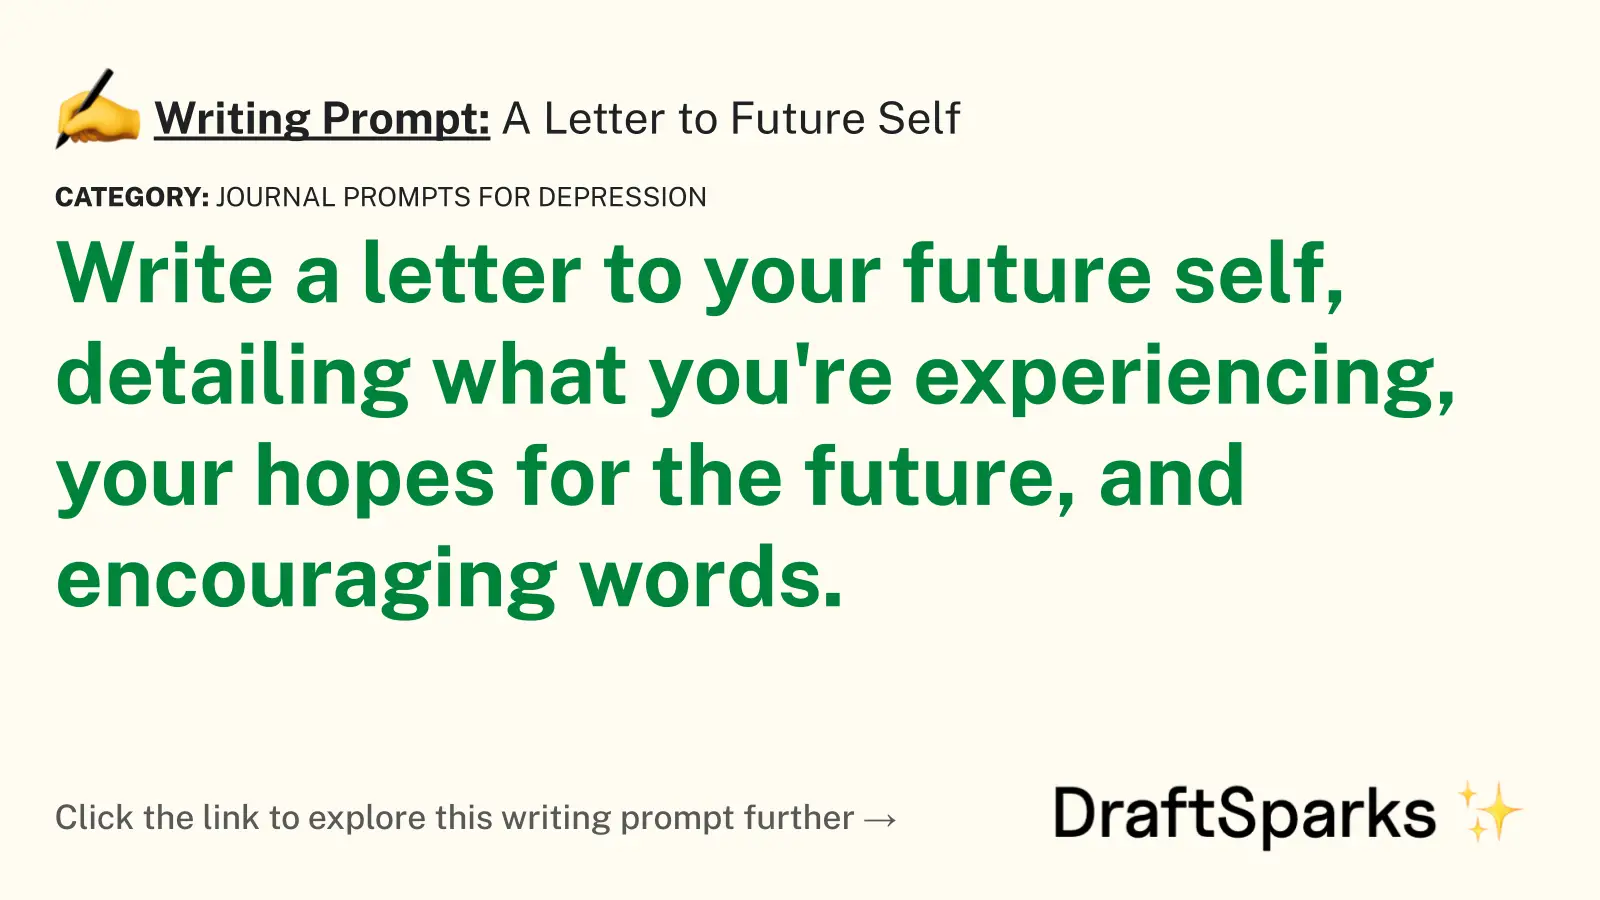 A Letter to Future Self